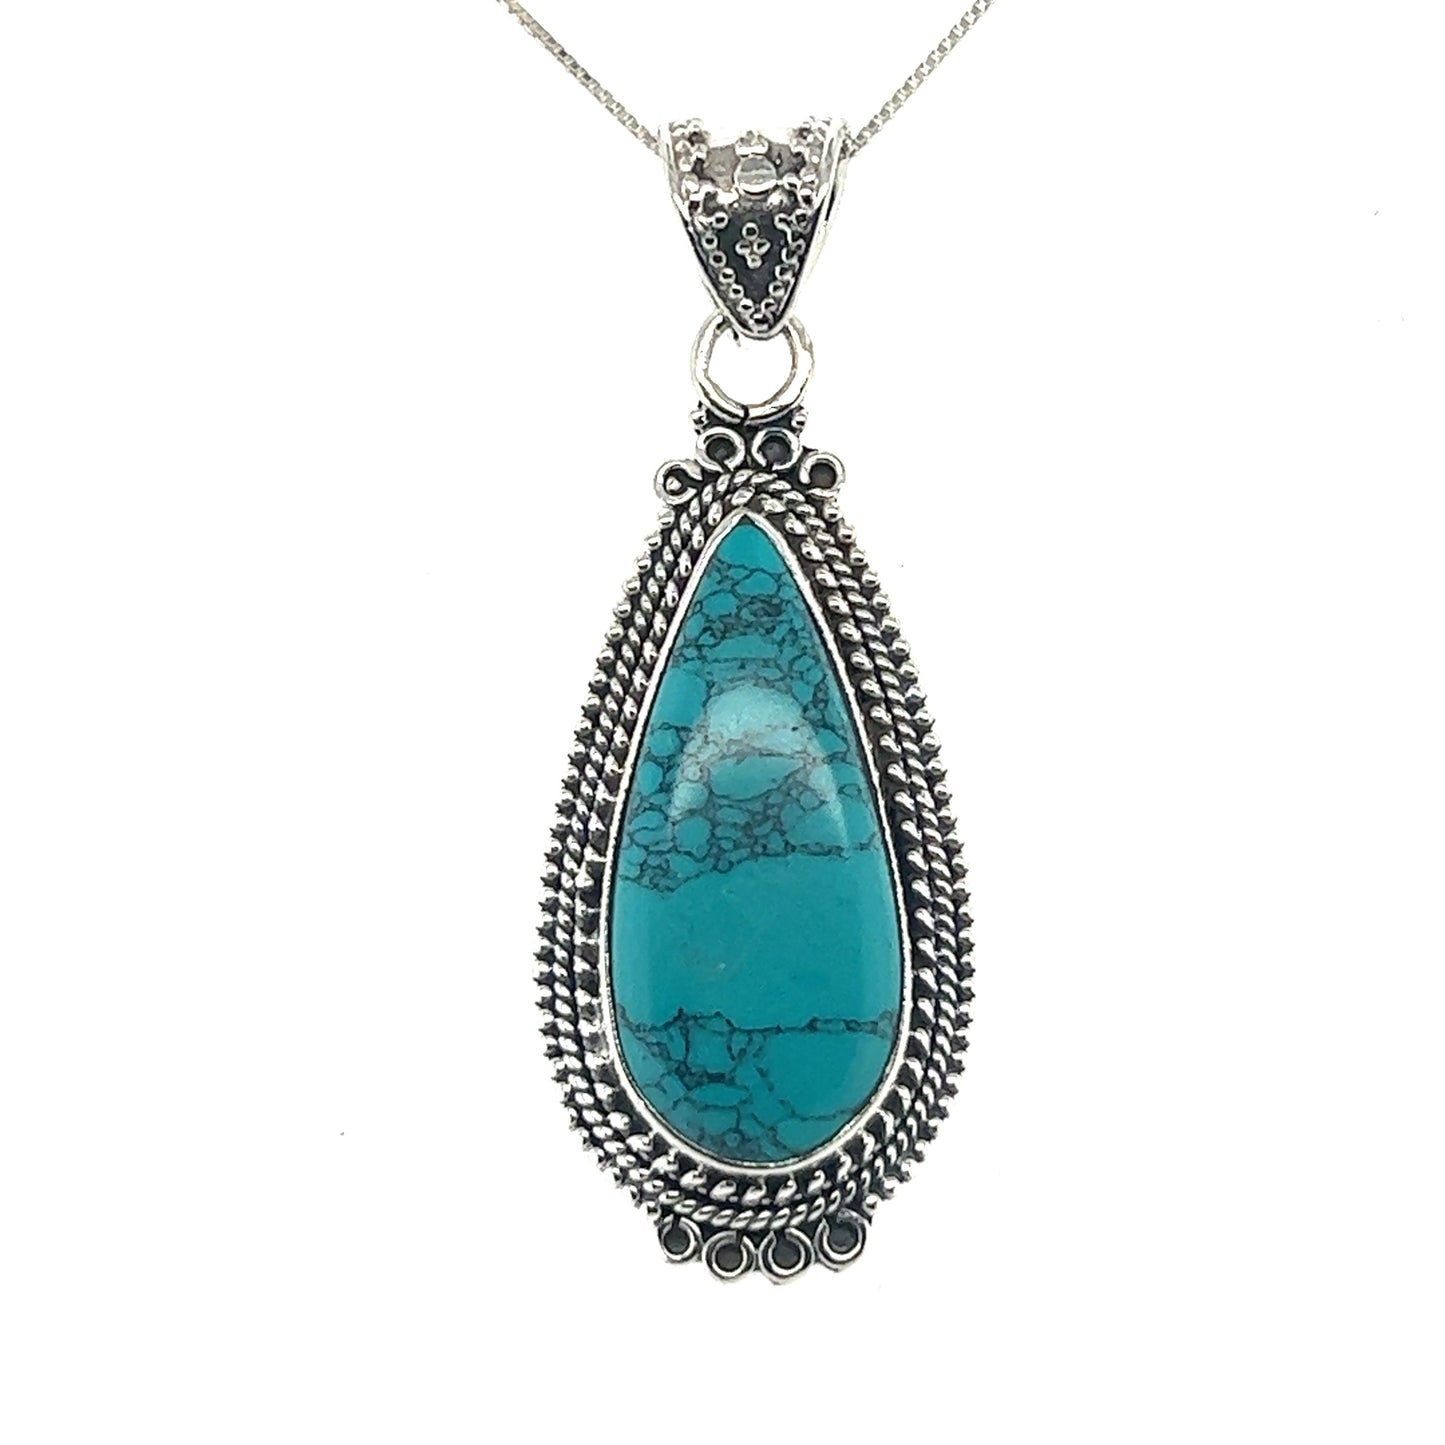 
                  
                    A Super Silver Striking Teardrop Gemstone Pendant with Beaded Detailing featuring a teardrop-shaped turquoise stone.
                  
                